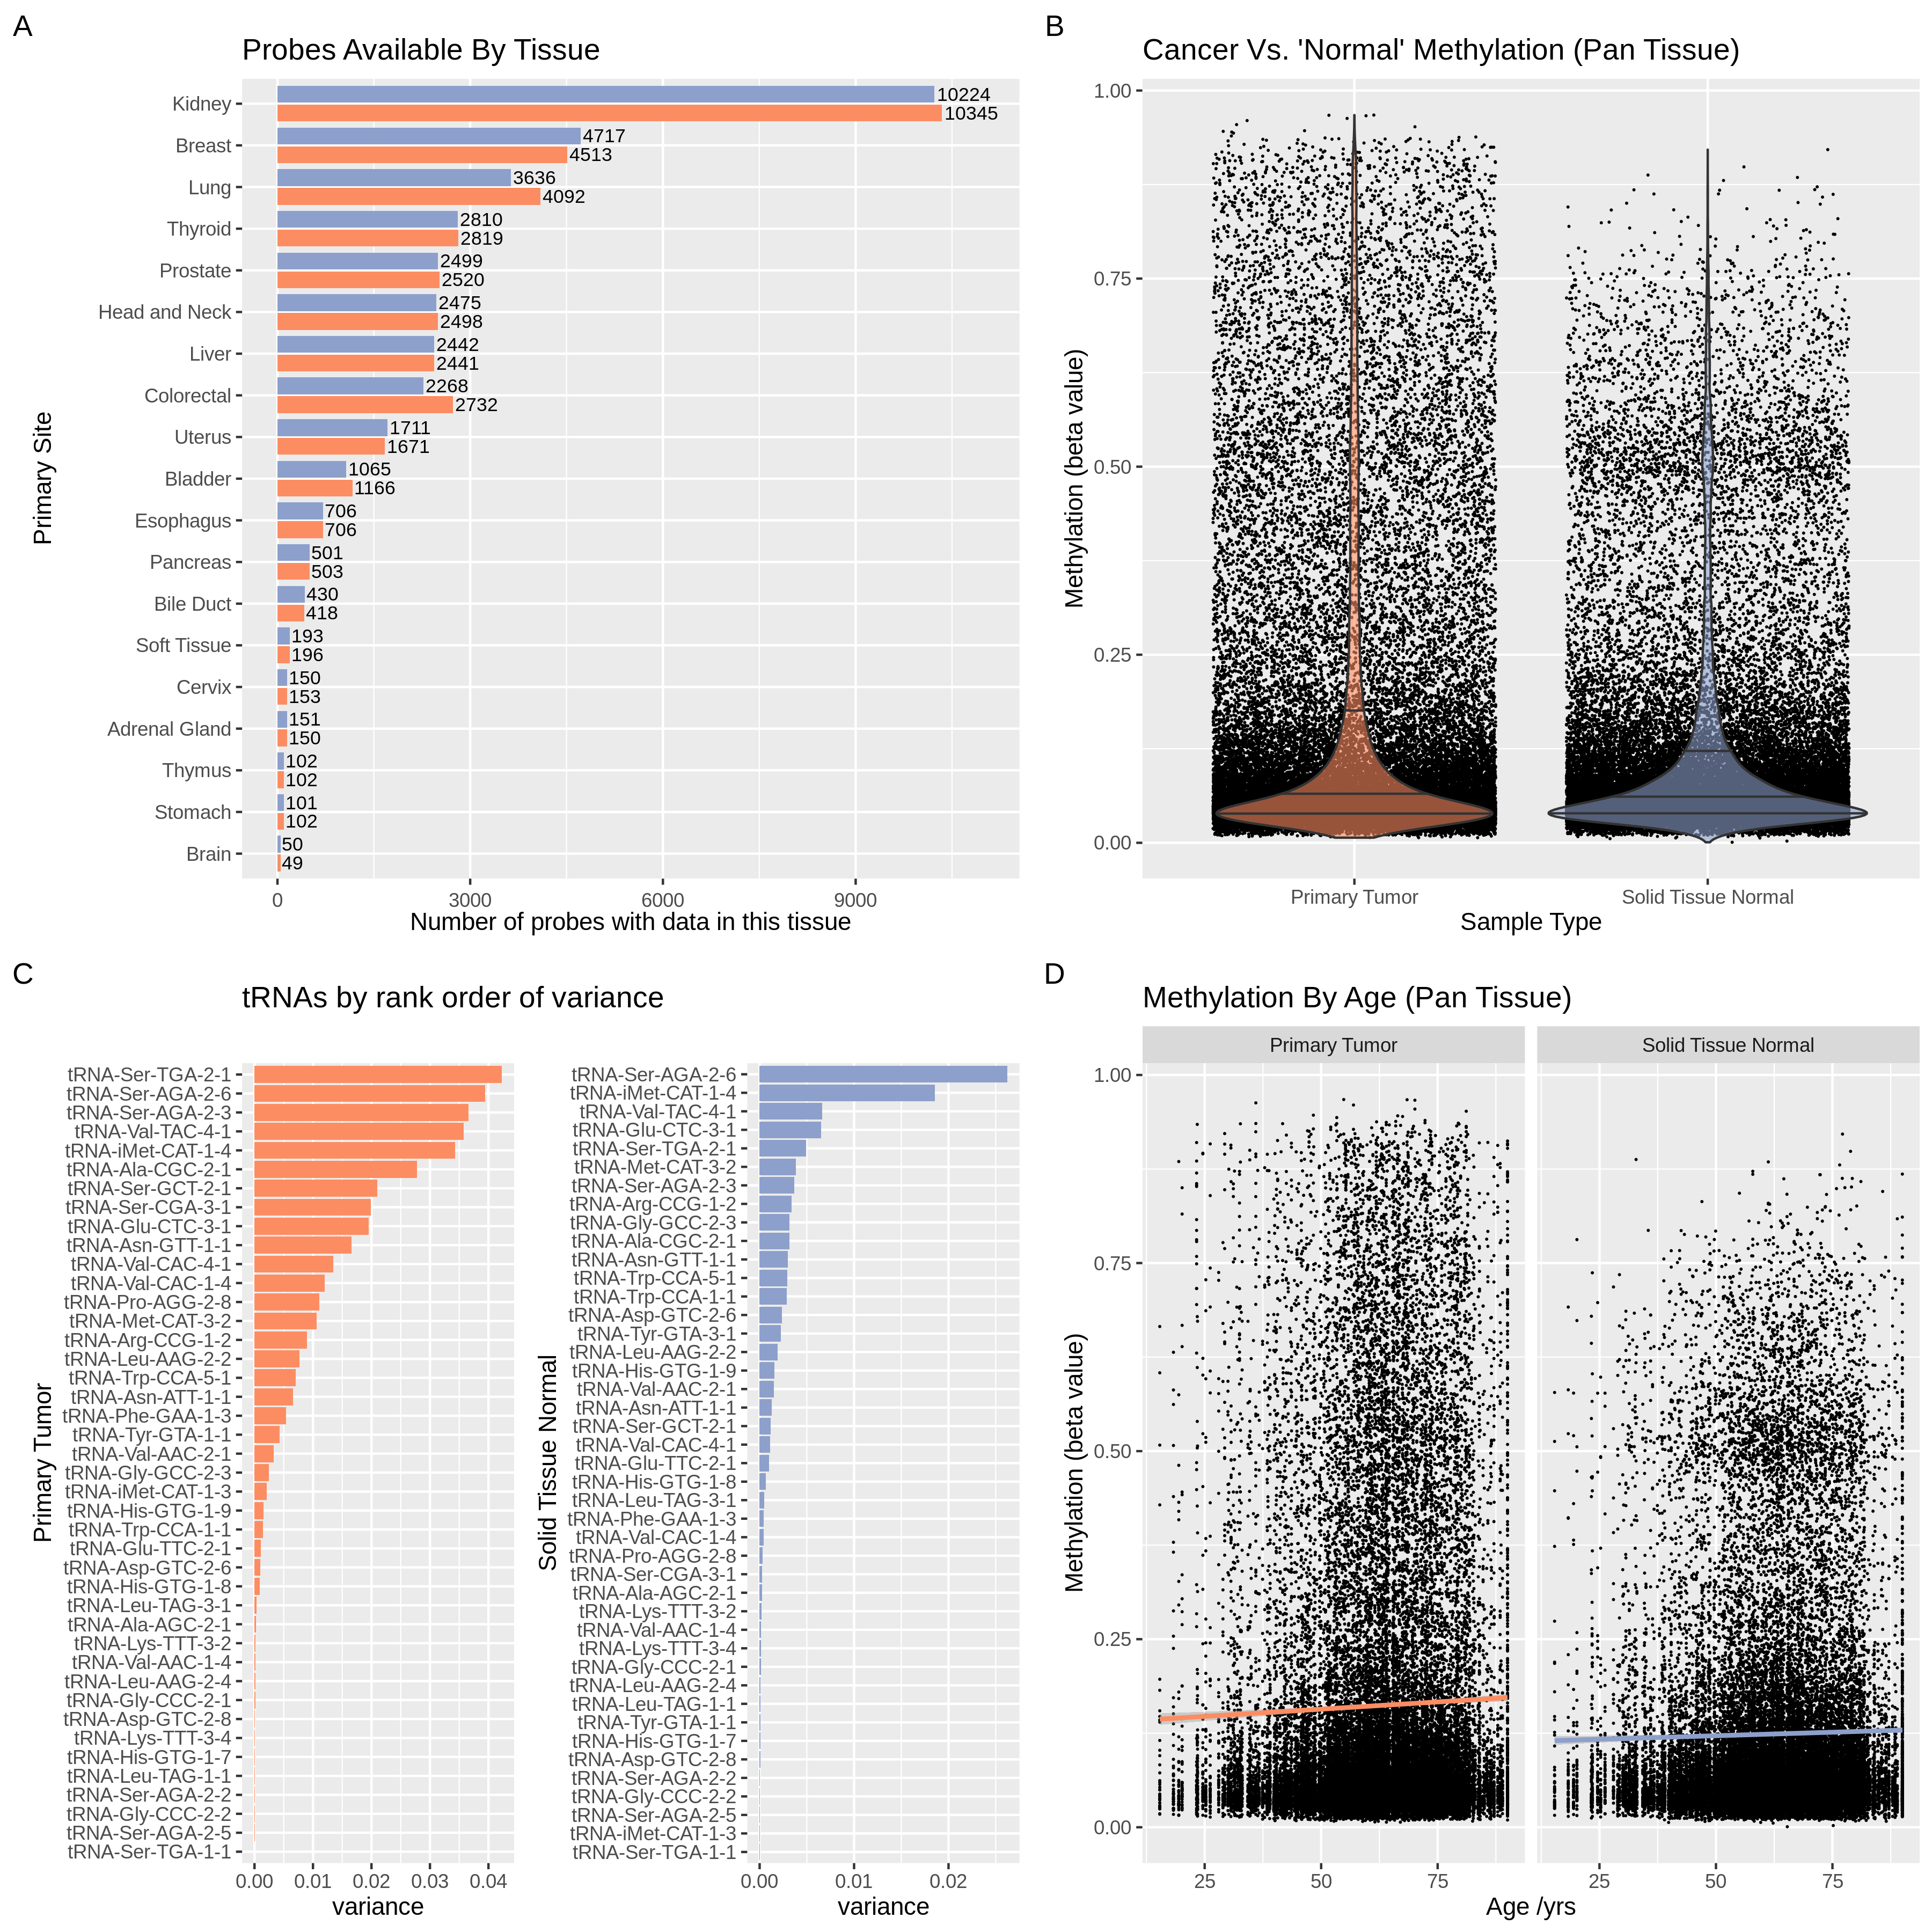 Global properties of tRNA methylation data for 45 tRNA genes across 19 tissues with matched normal and tumour samples from 733 cases in TCGA [372,373].